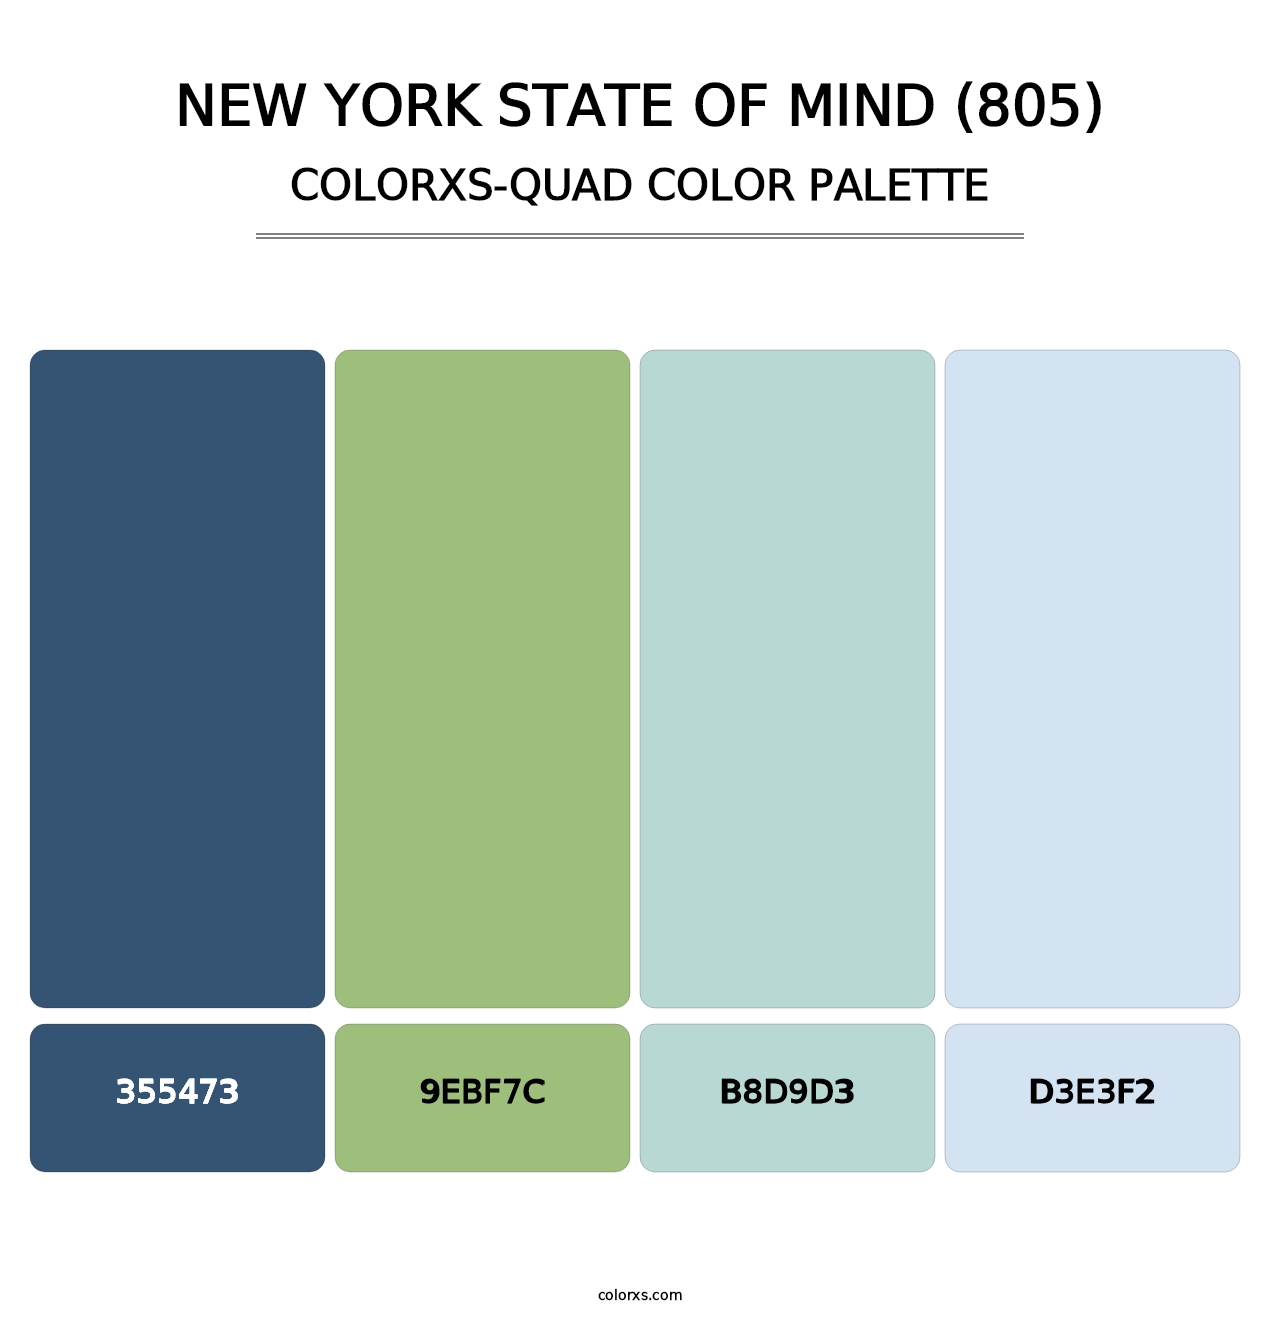 New York State of Mind (805) - Colorxs Quad Palette